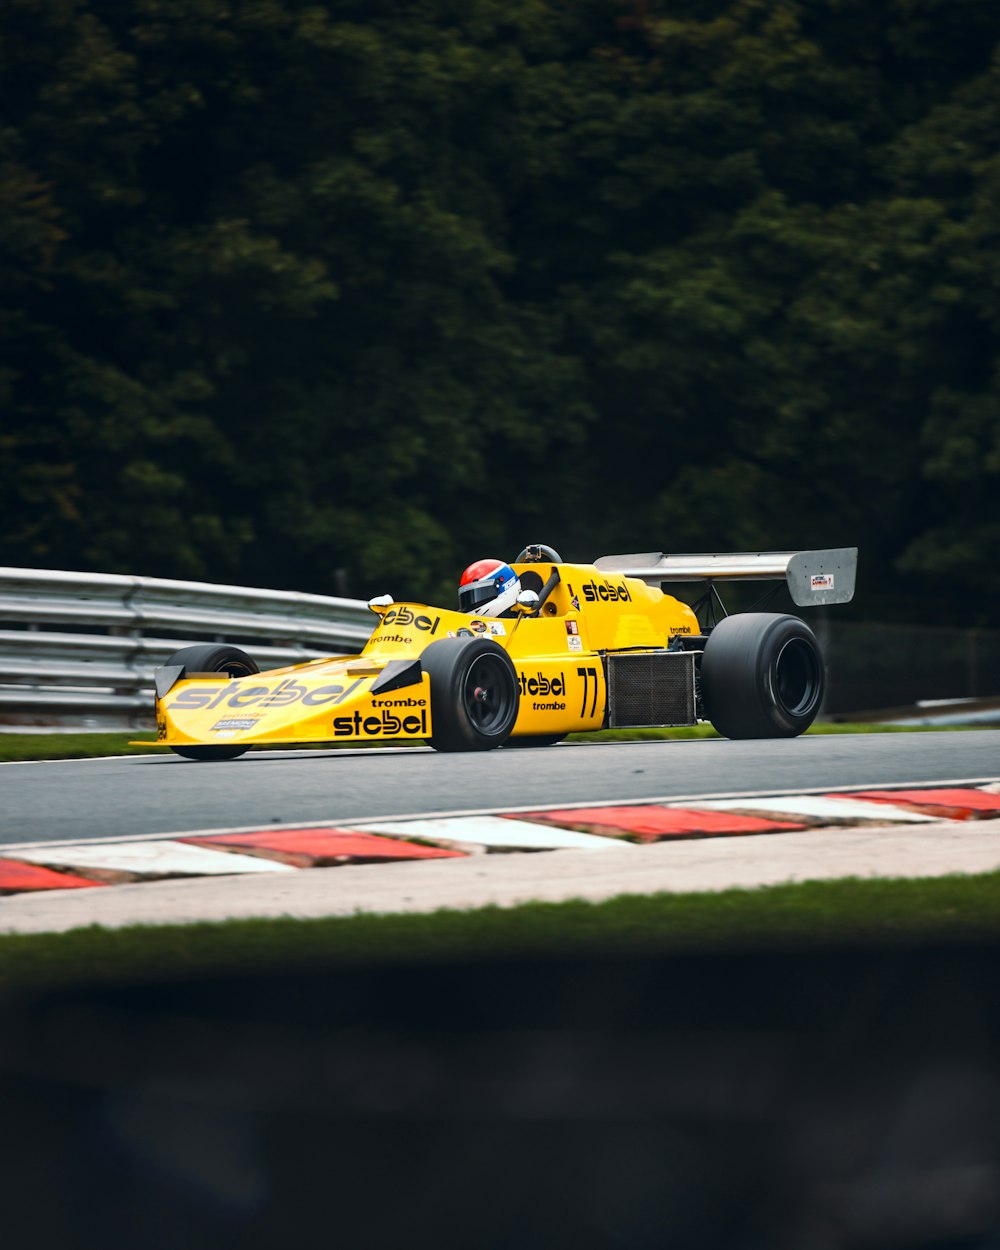 yellow and black f 1 car on track during daytime